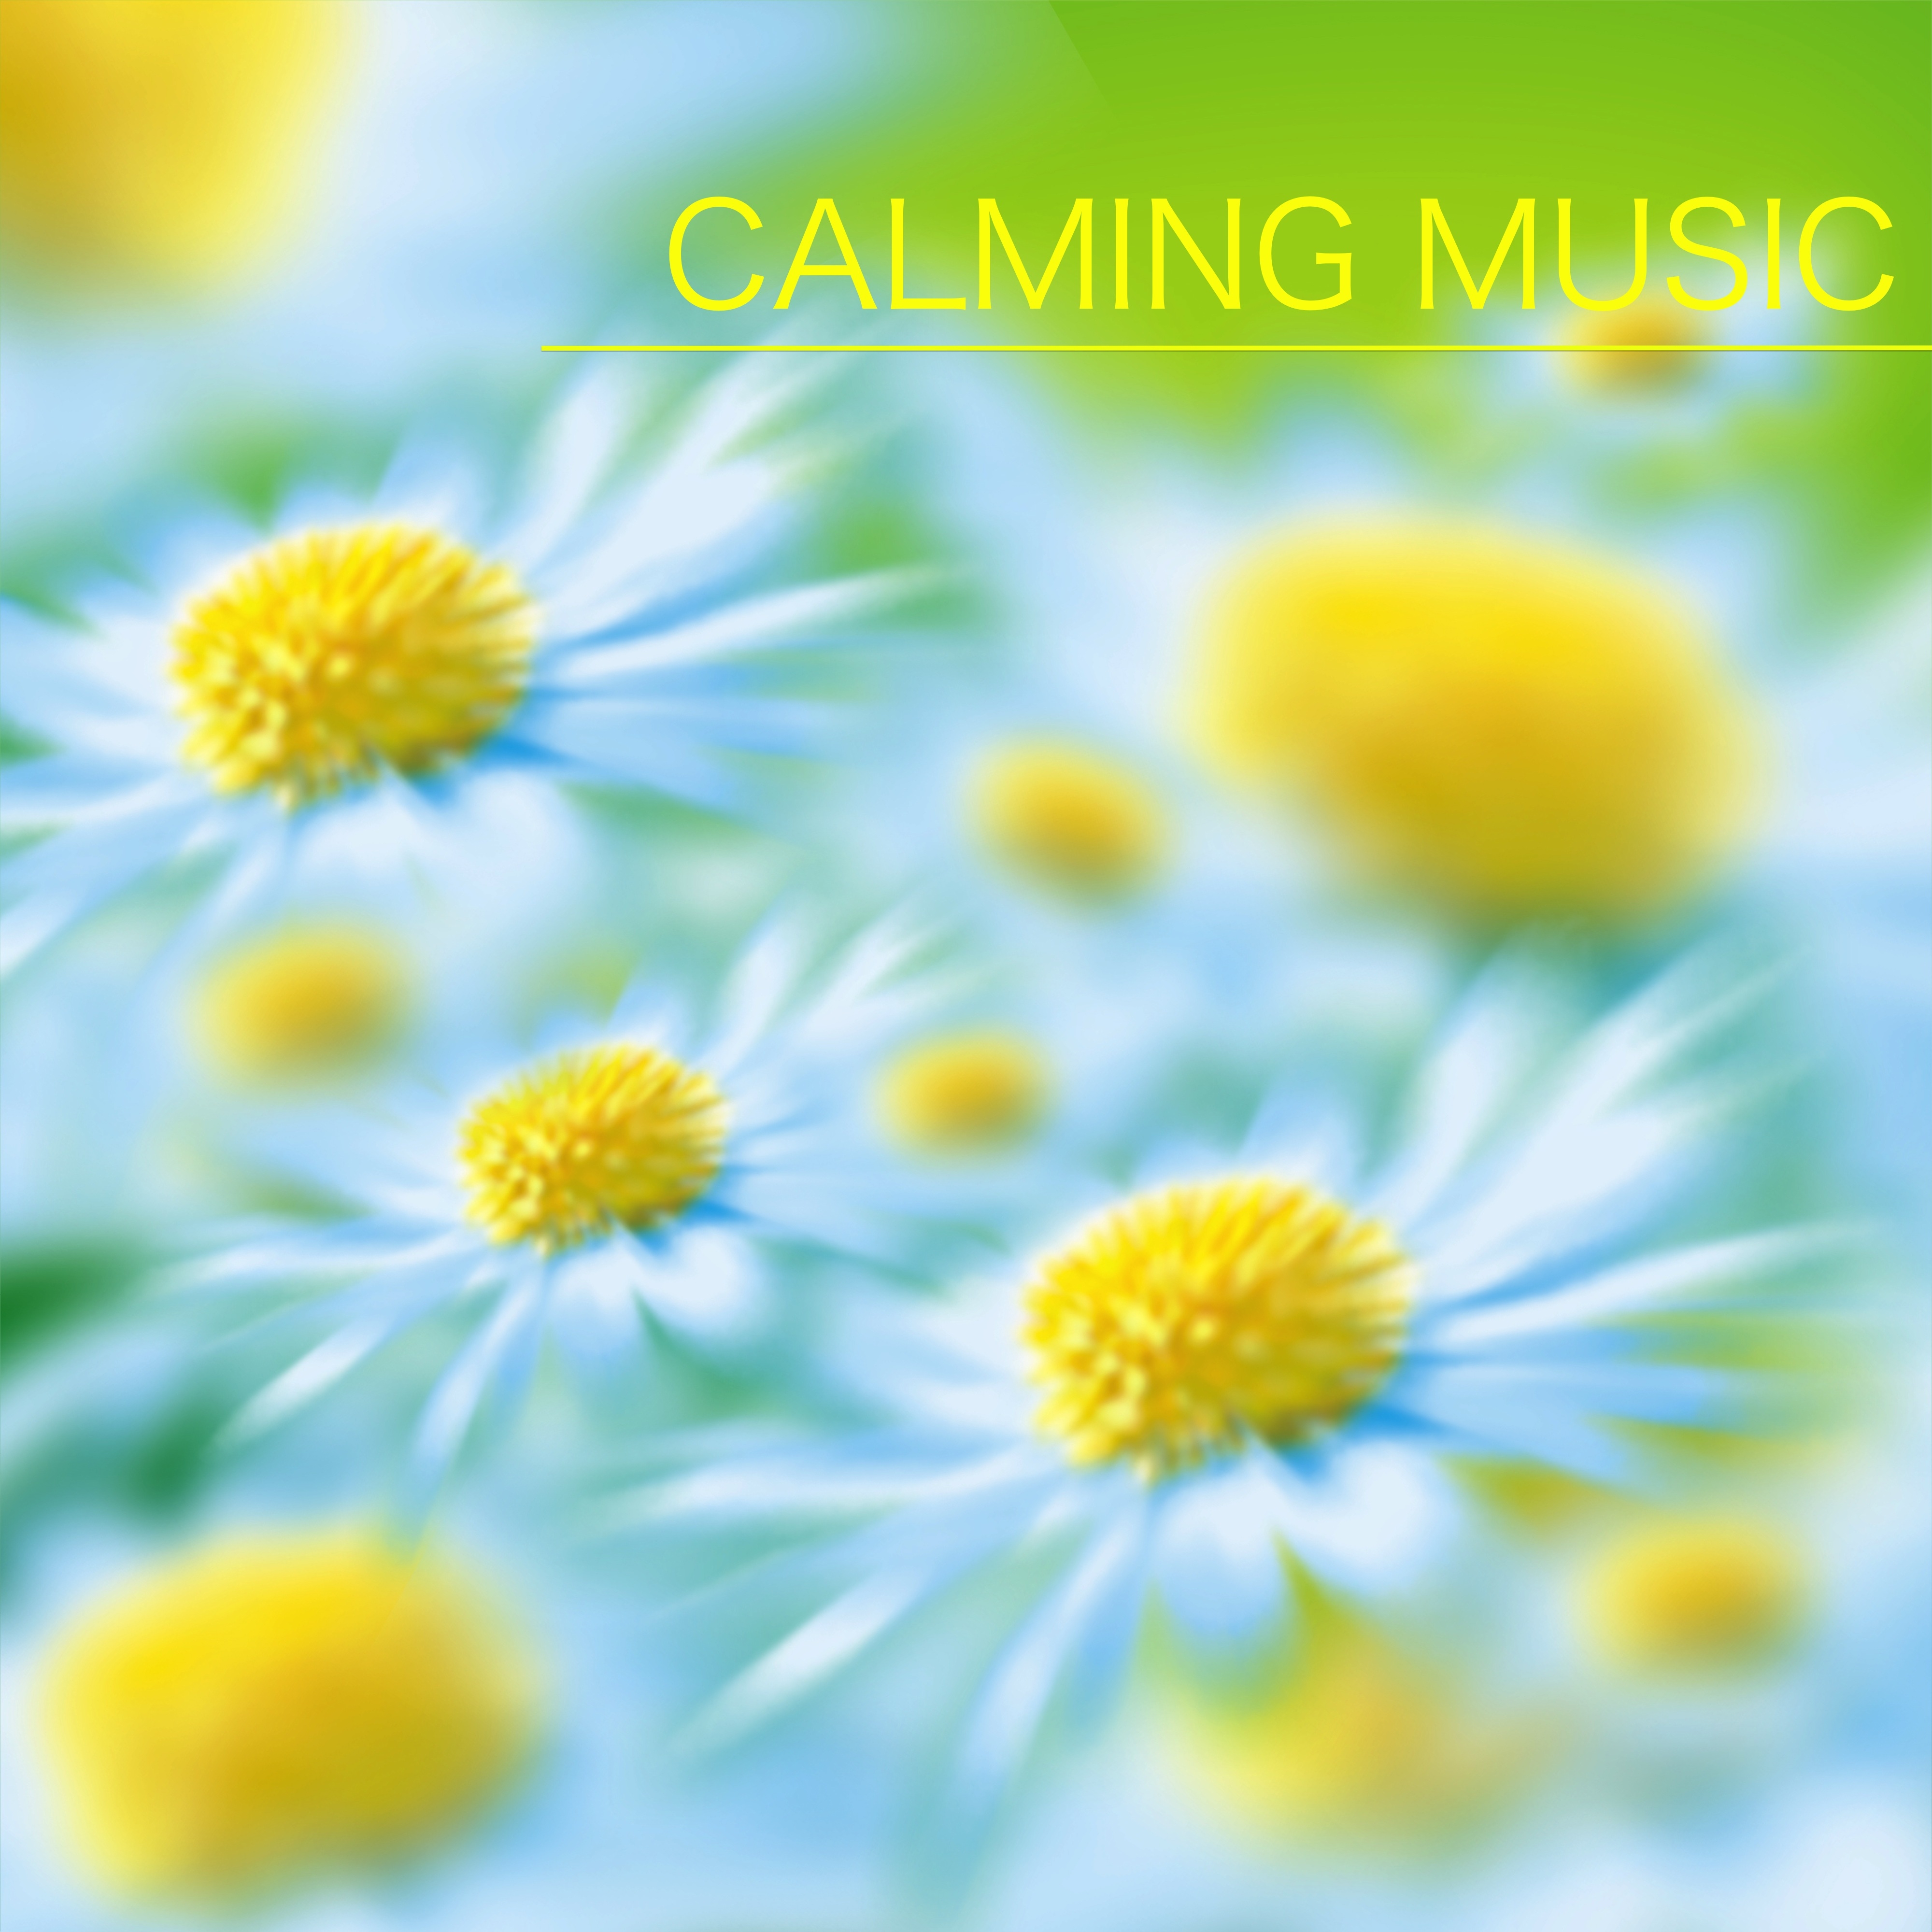 Relaxing Sounds of Nature